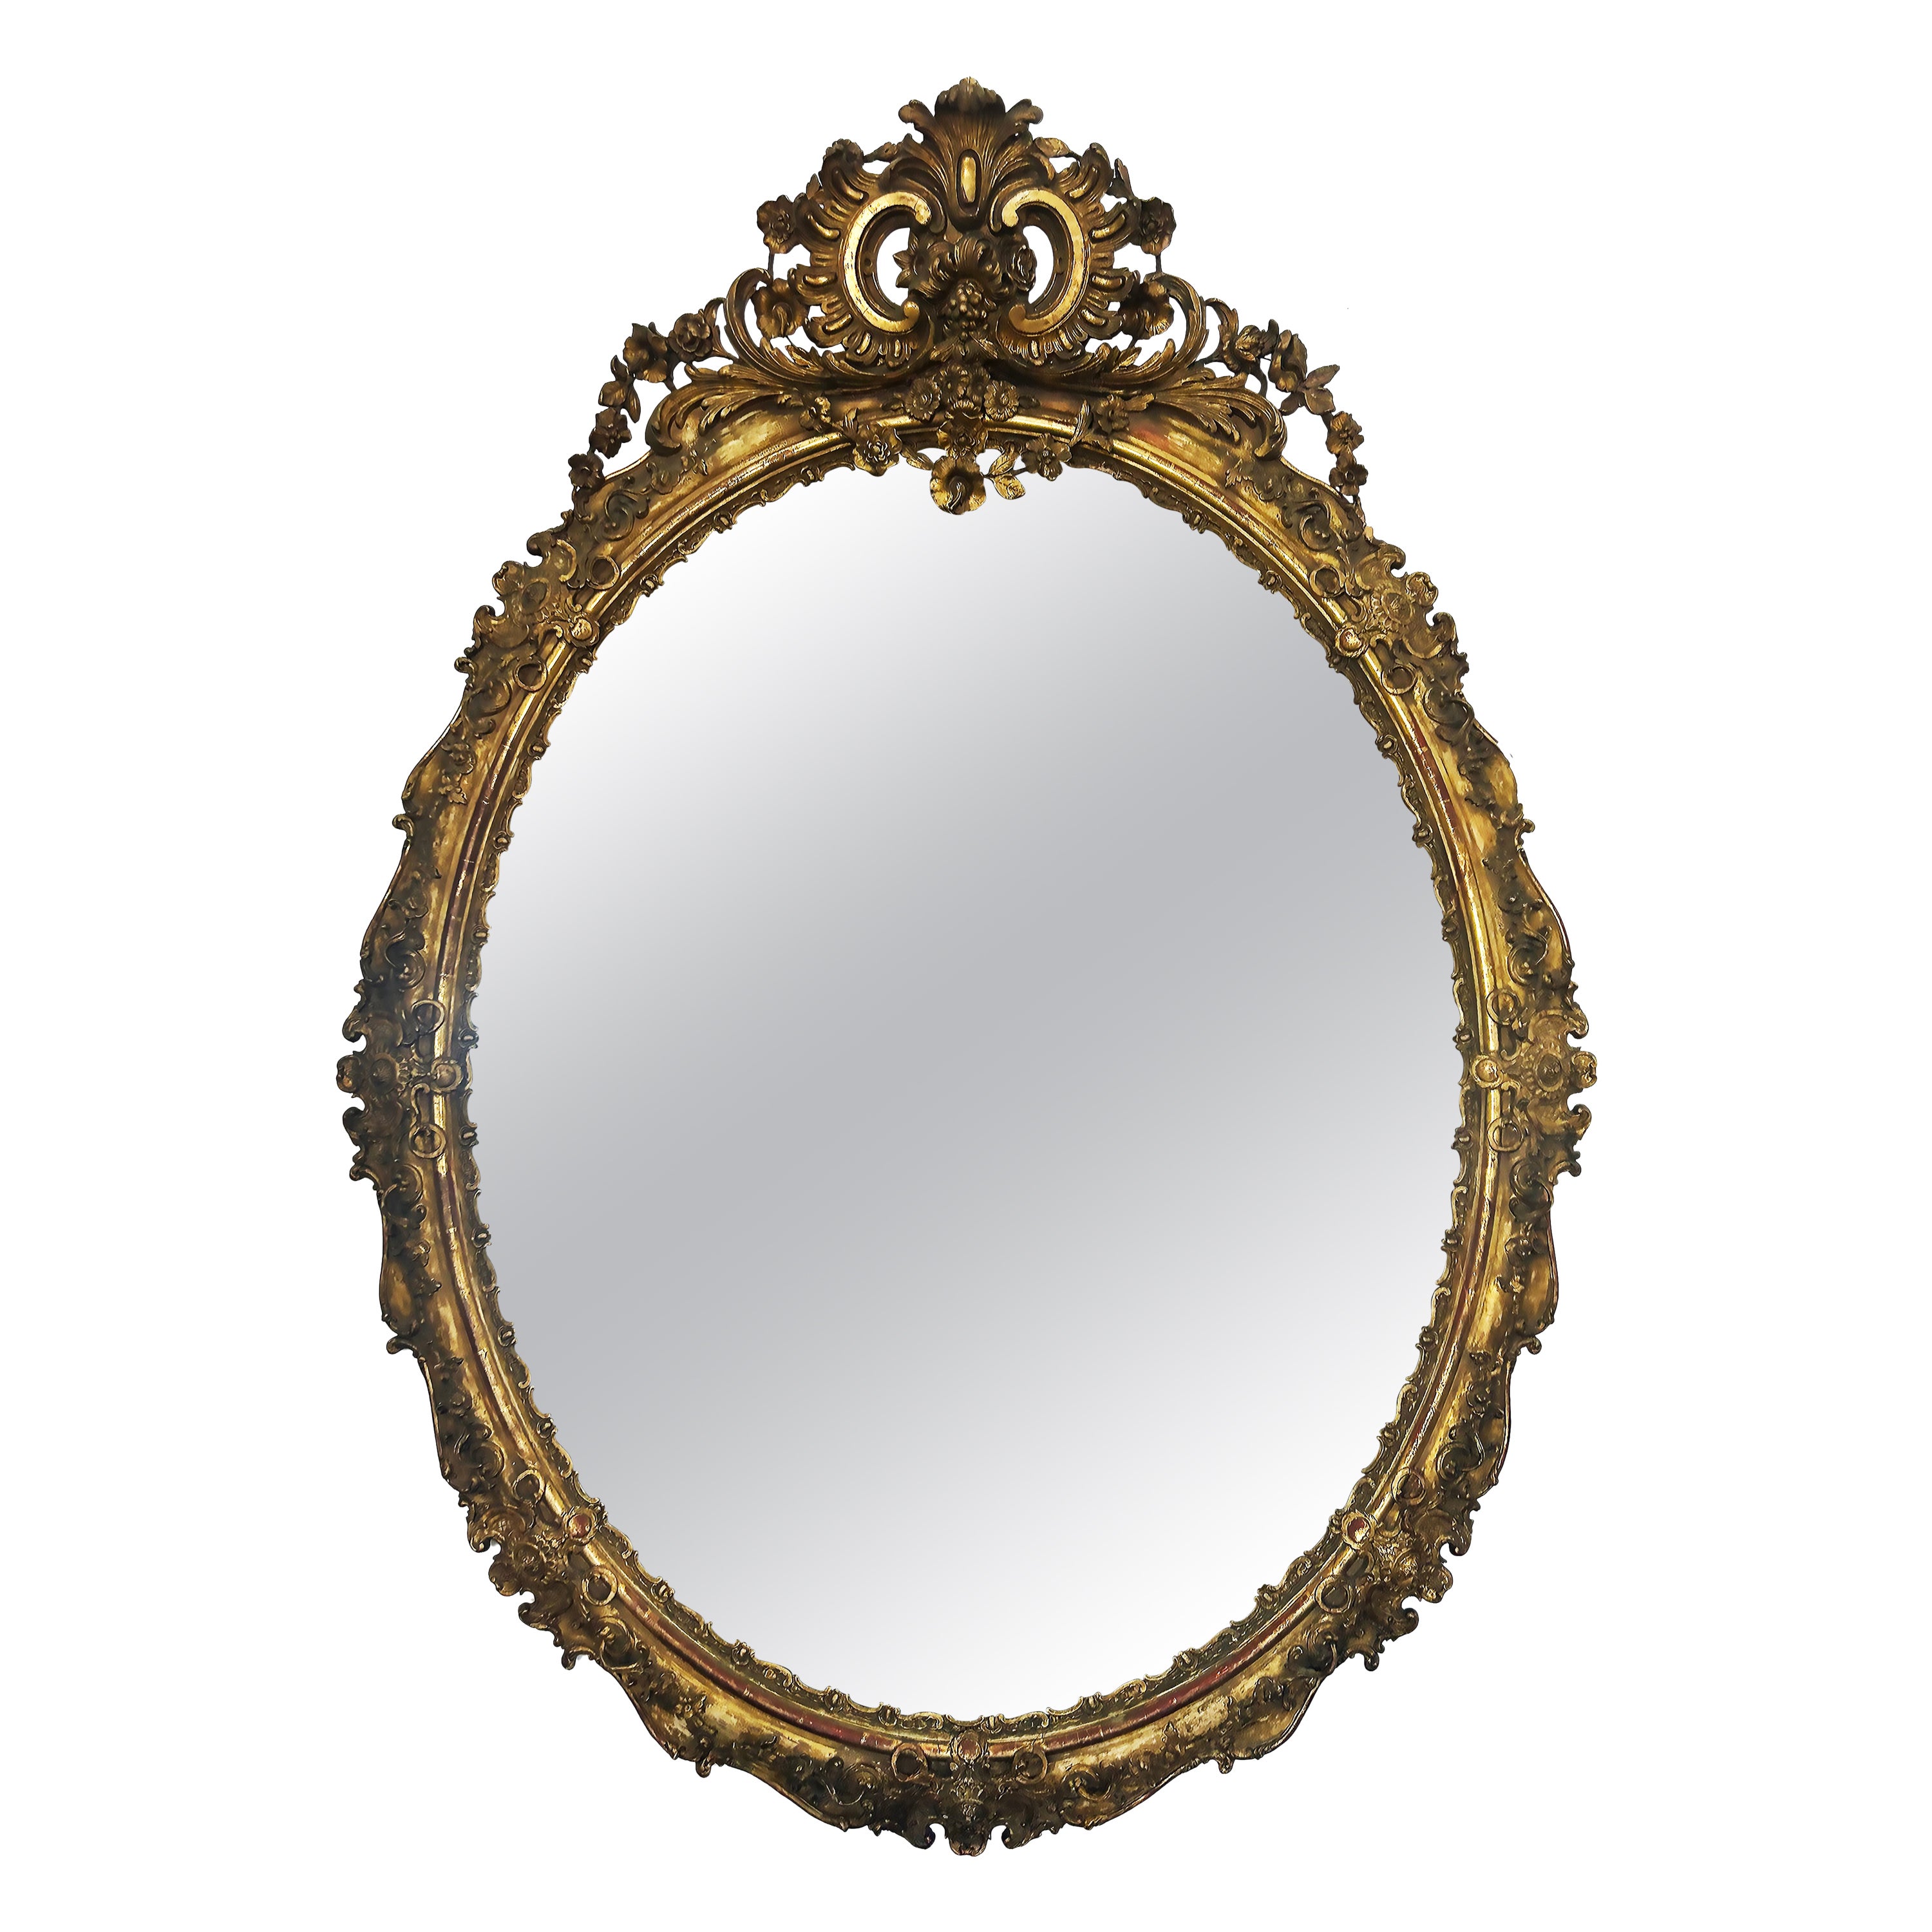 Monumental European Oval Giltwood Gesso Mirror, Late 19th-Early 20th Century For Sale